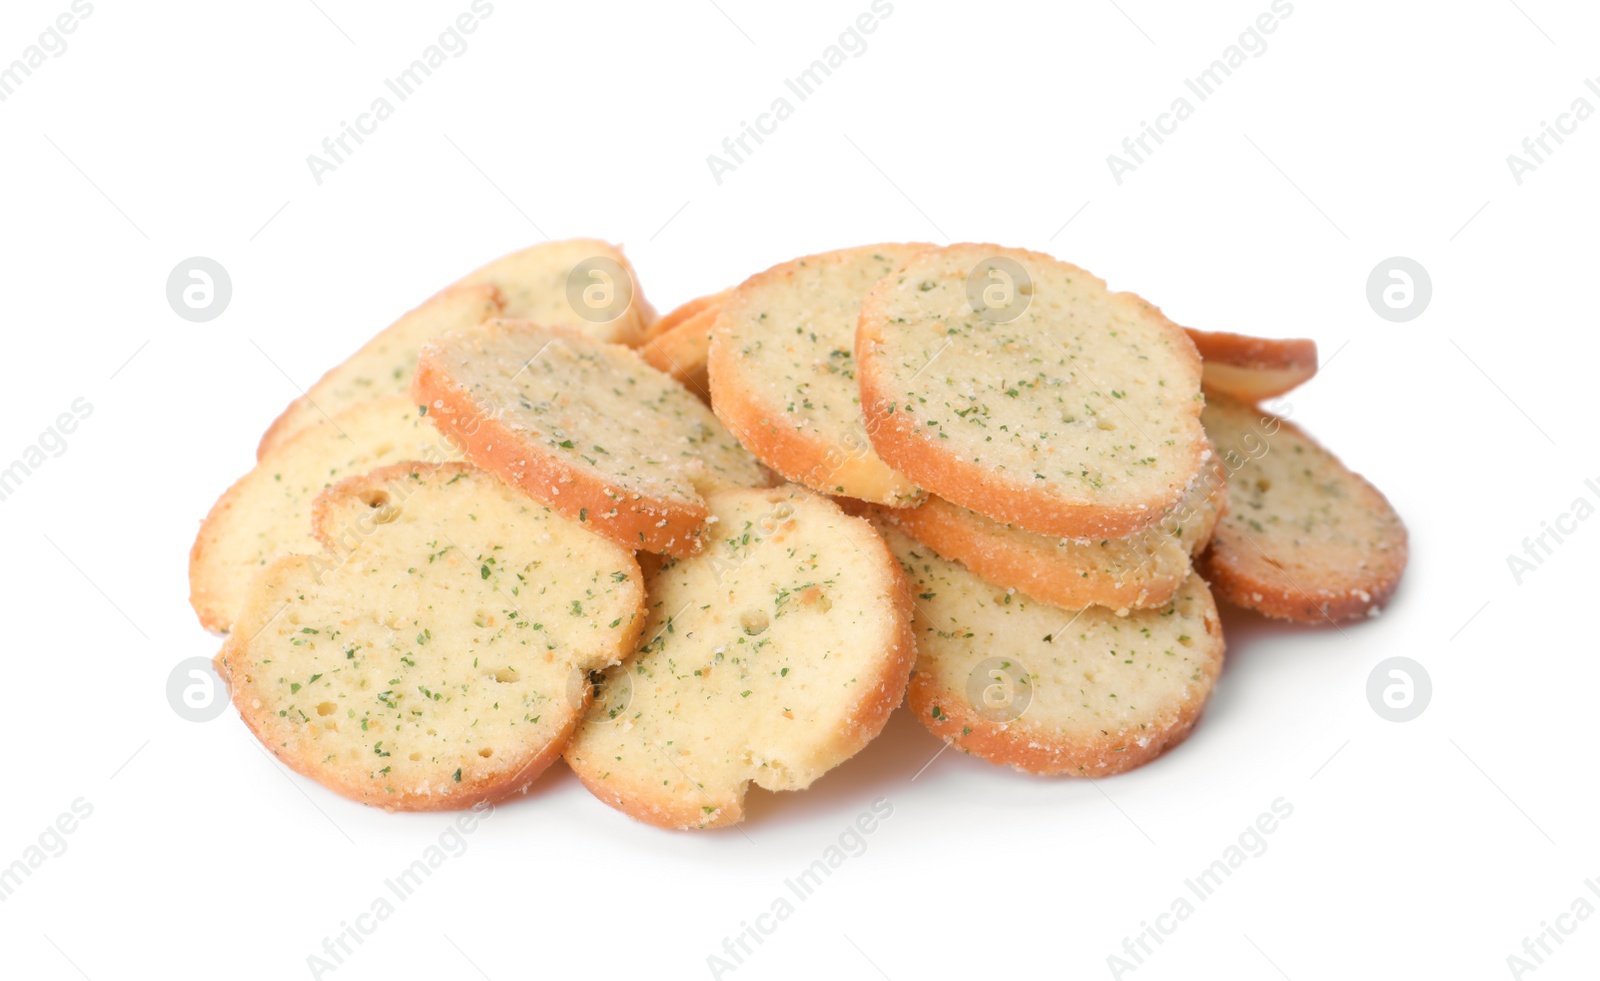 Photo of Heap of crispy rusks with seasoning on white background